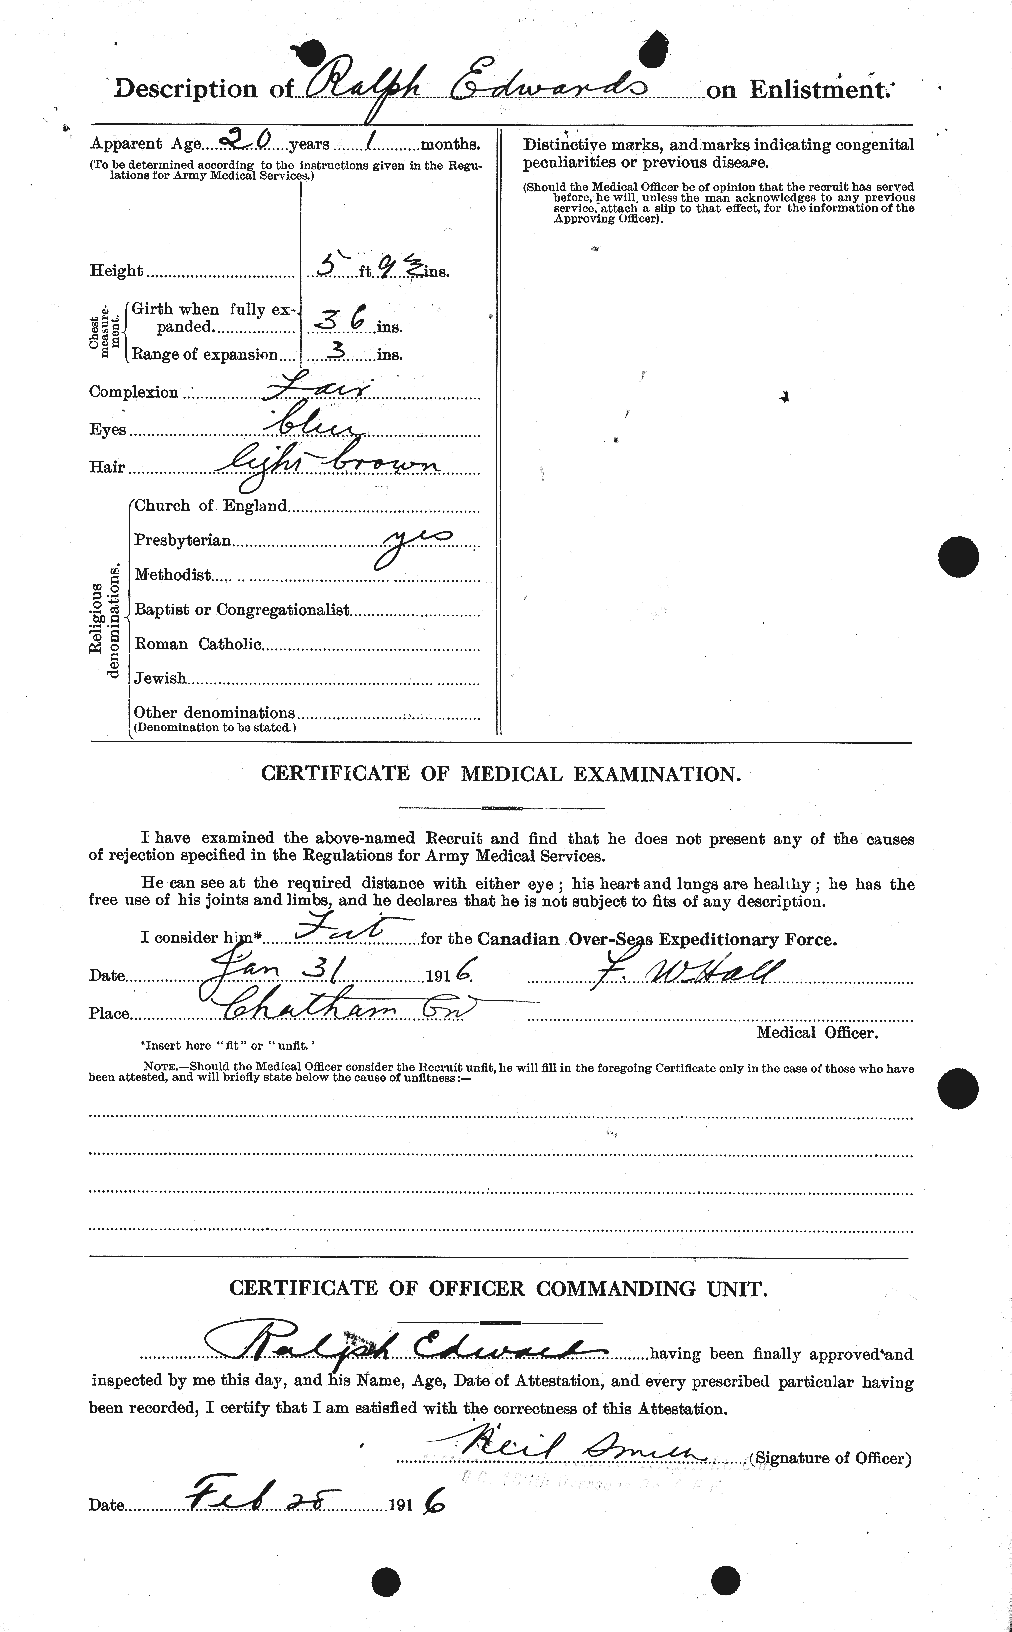 Personnel Records of the First World War - CEF 310244b